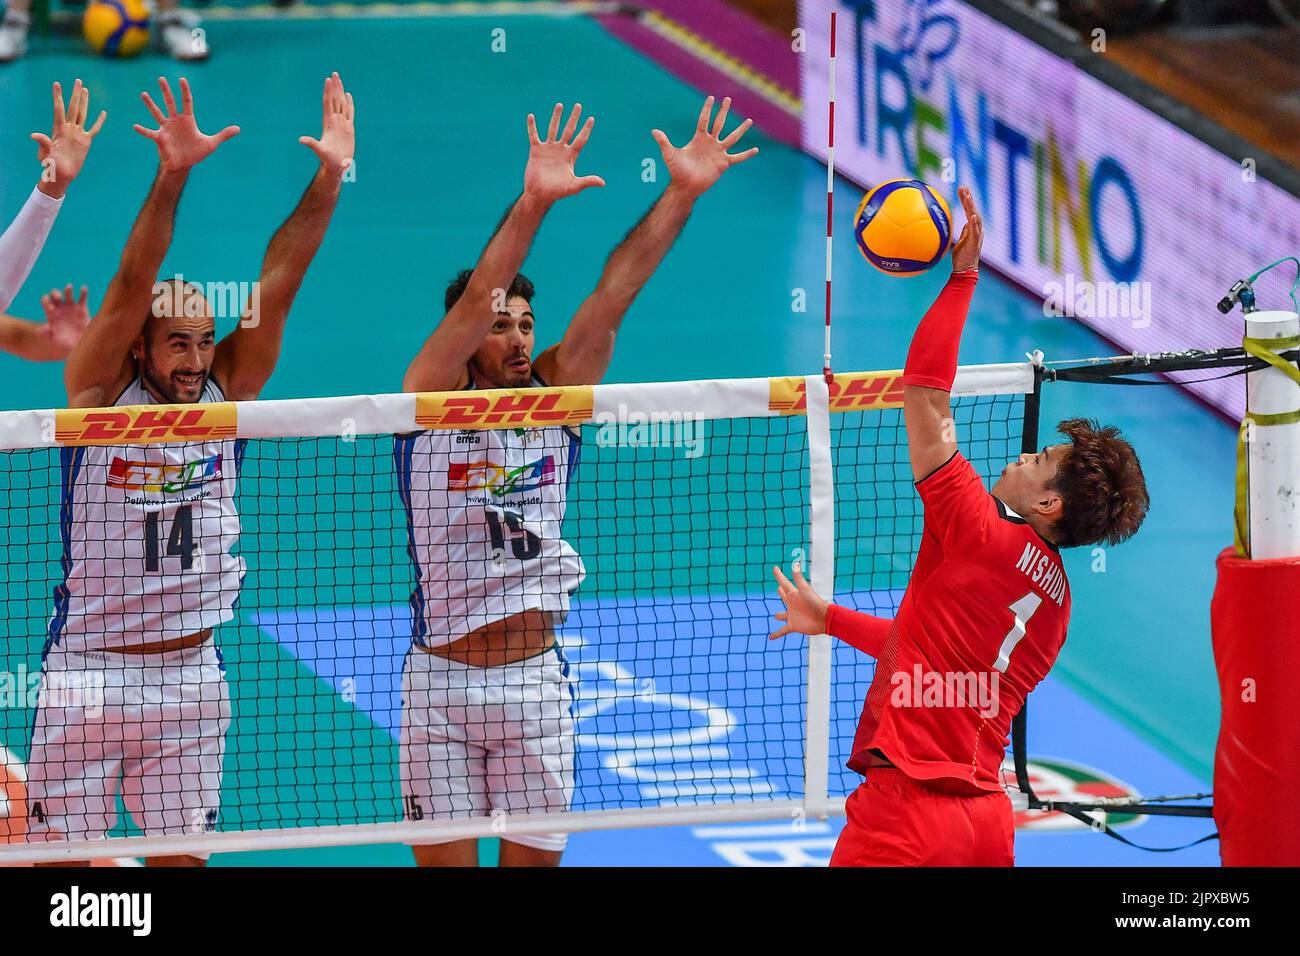 Cuneo, Cuneo, Italy, August 20, 2022, Gianluca Galassi (Italy) - Daniele Lavia (Italy) - Nishida Yuji (Japan)  during  DHL Test Match Tournament - Italy vs Japan - Volleyball Intenationals Stock Photo